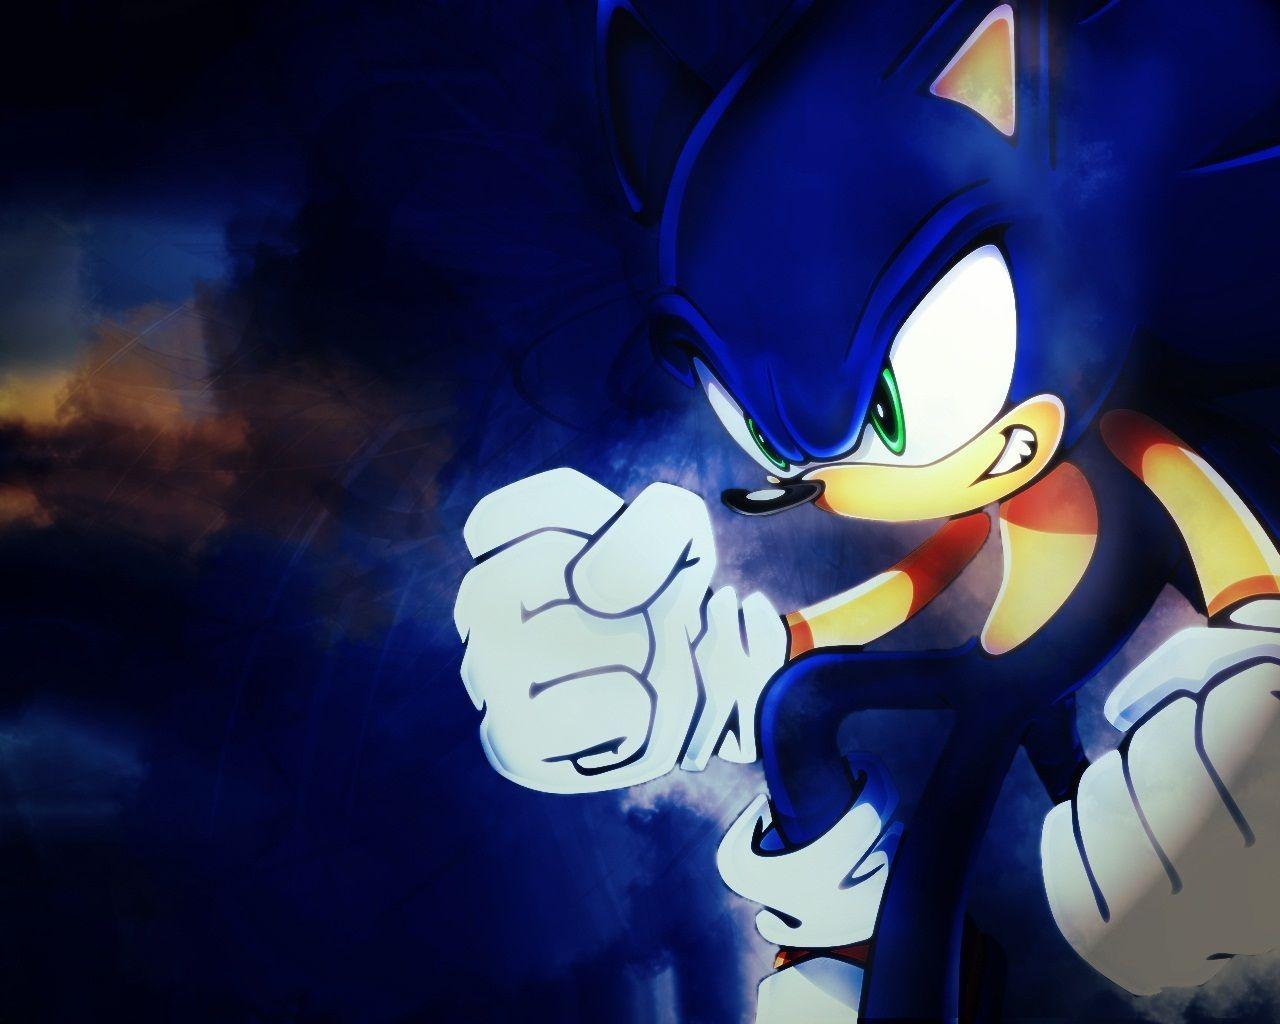 Sonic the Hedgehog 2 Tails and Sonic 4K Wallpaper iPhone HD Phone #3381g